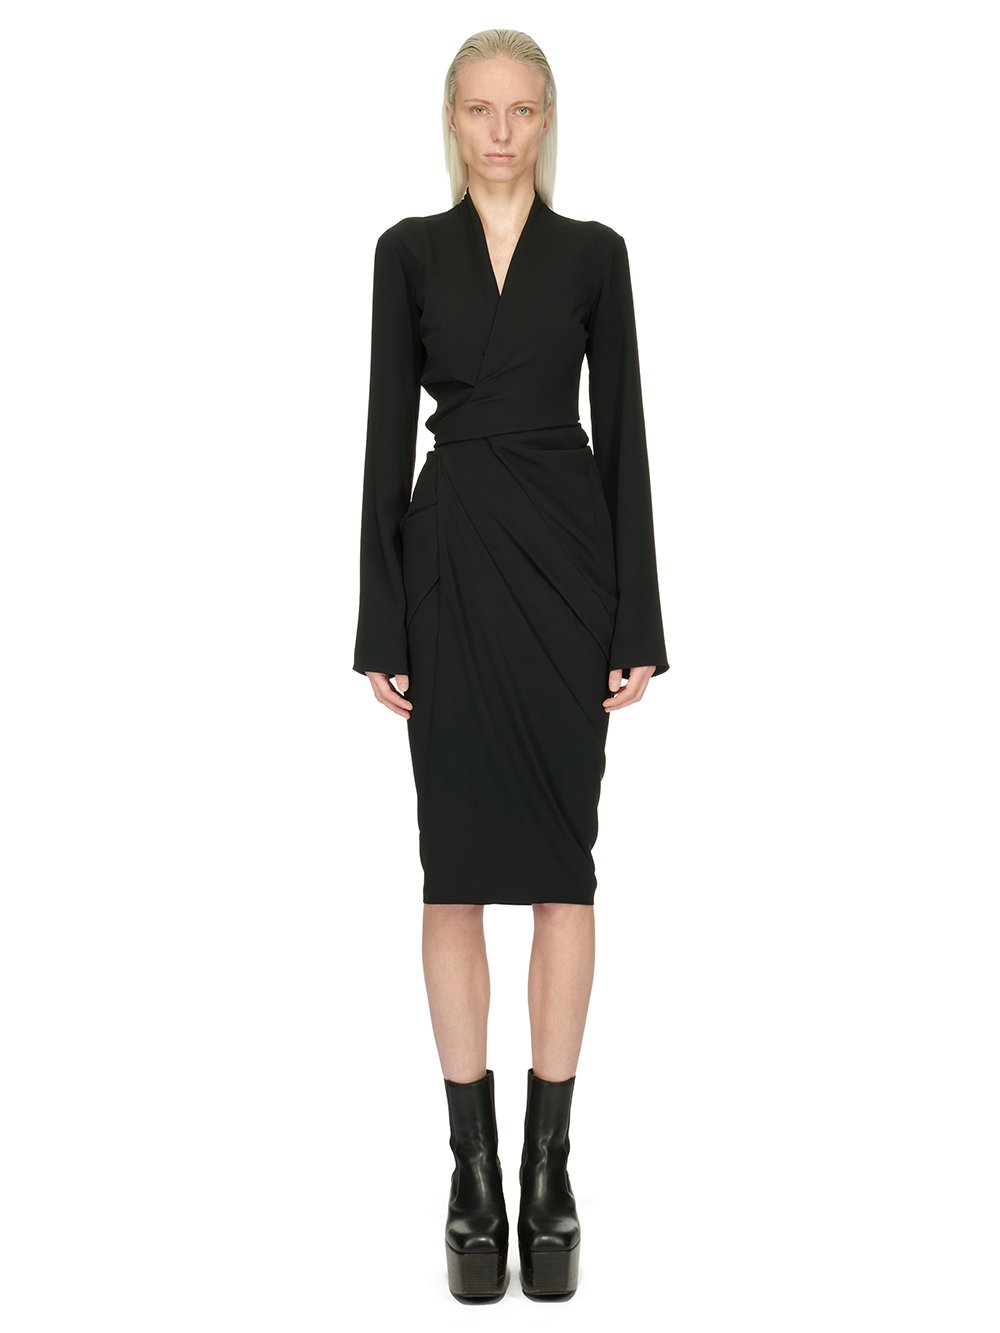 RICK OWENS FW23 LUXOR WRAP DRESS IN COCOON CREPE